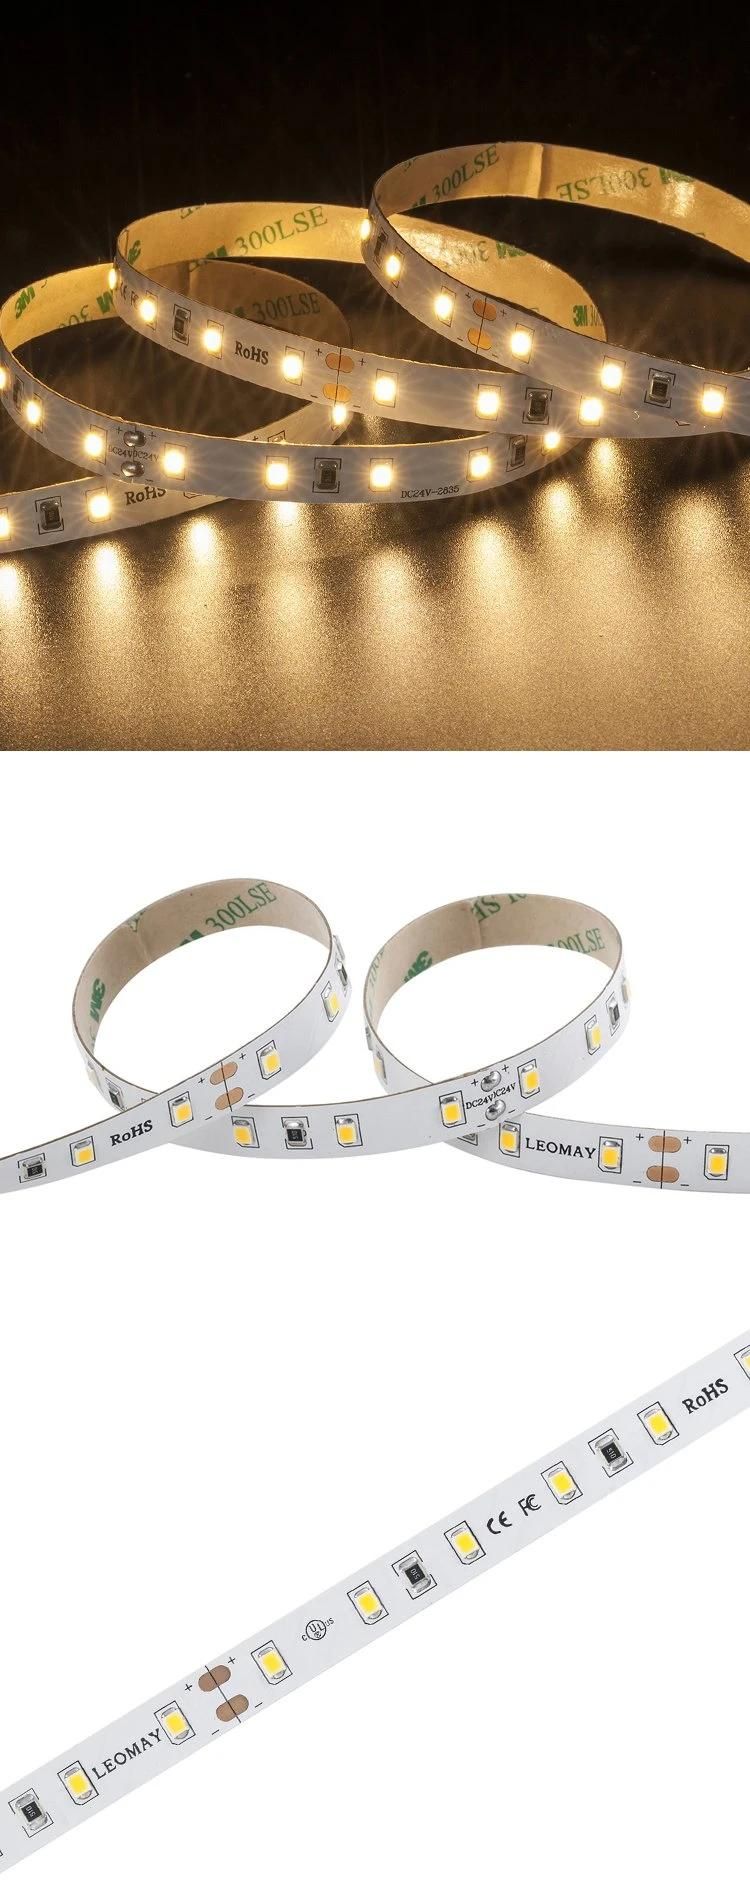 High quality SMD2835 LED Strip Light with CE Marked for Indoor Decoration